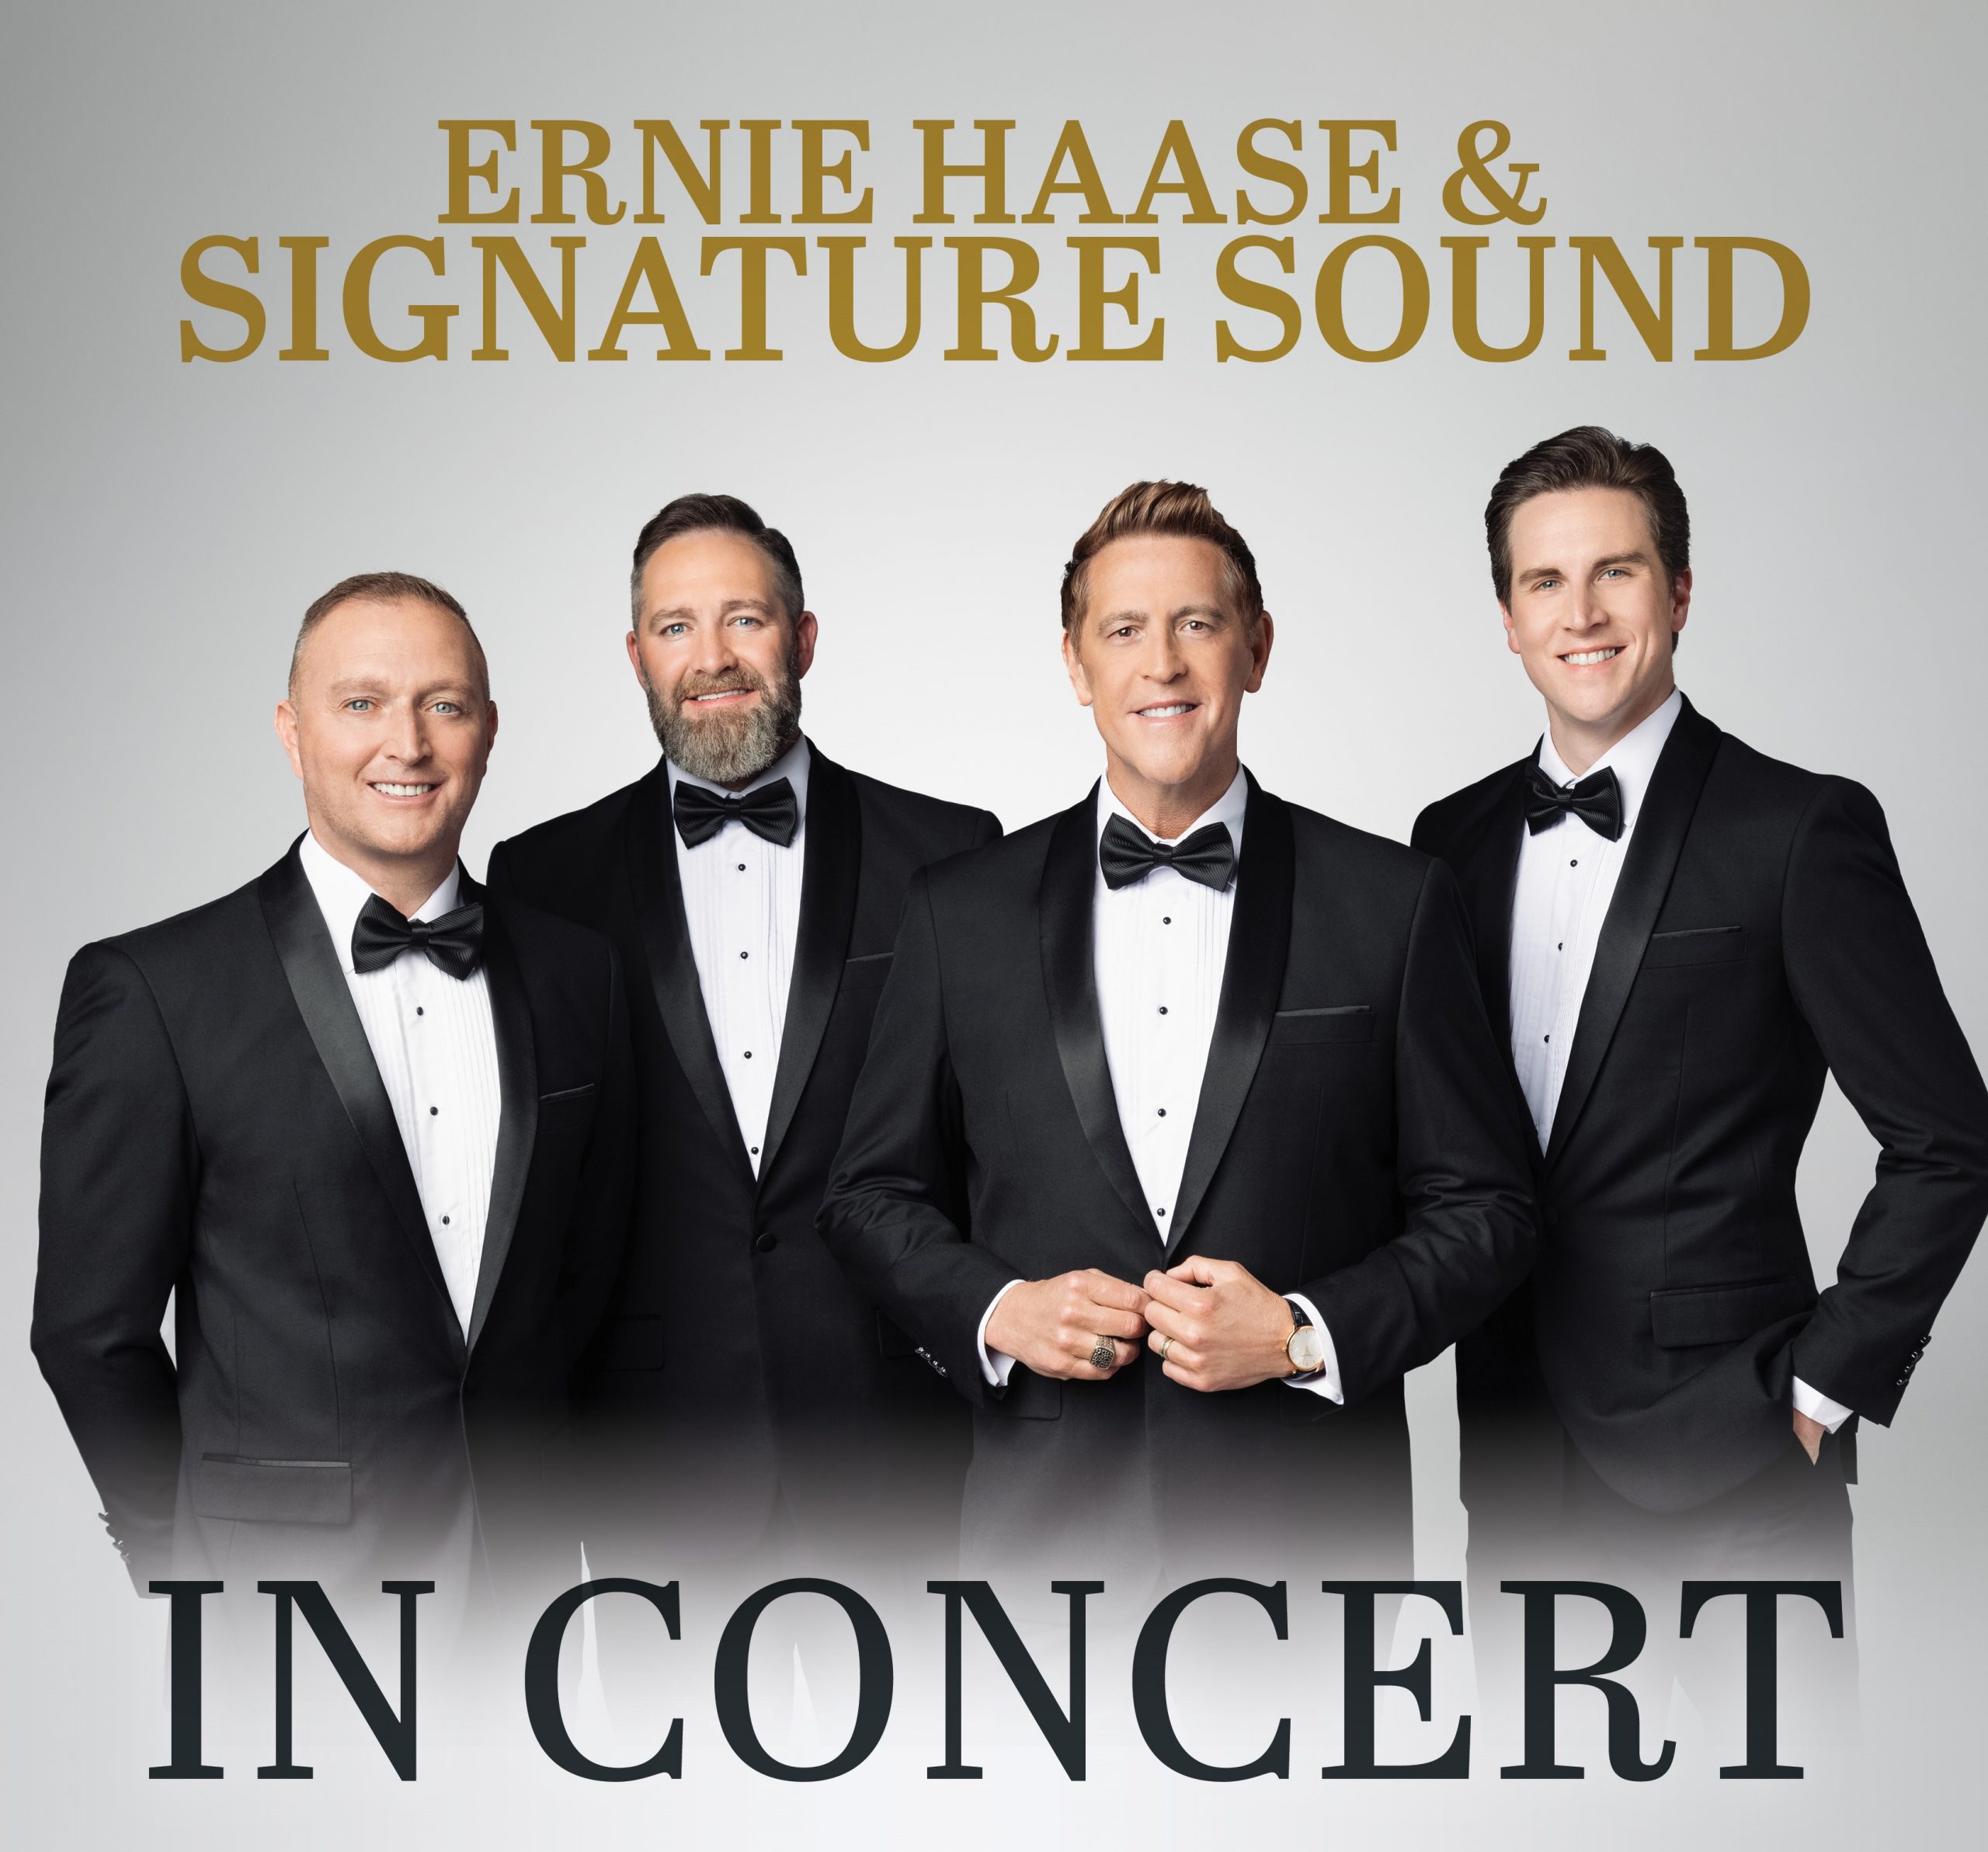 Ernie Haase & Signature Sound In Concert August 25th at Central Church